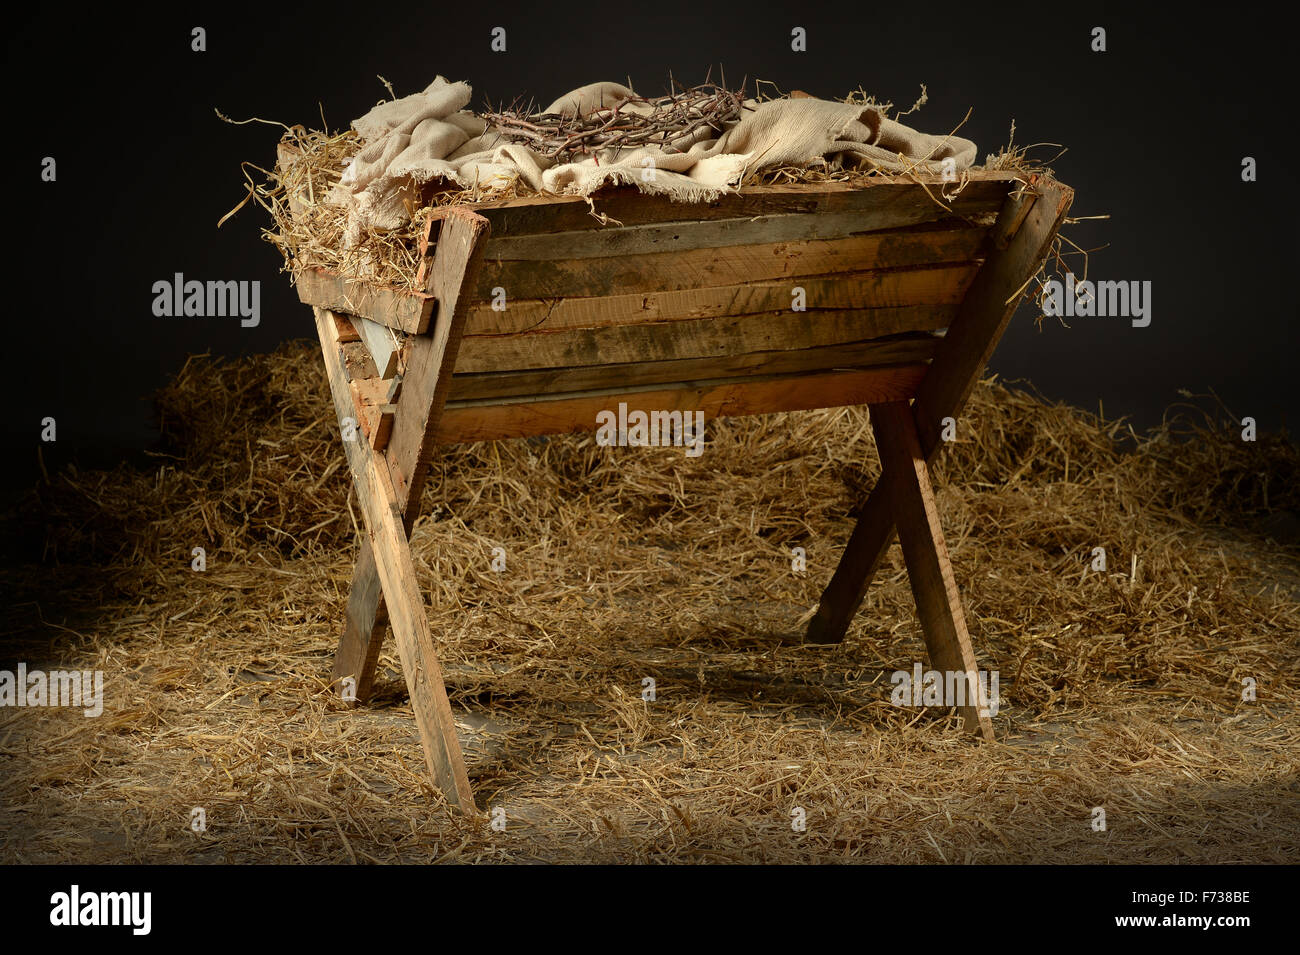 Manger with crown of thorns in barn. Concept based on the birth and death of Jesus. Stock Photo